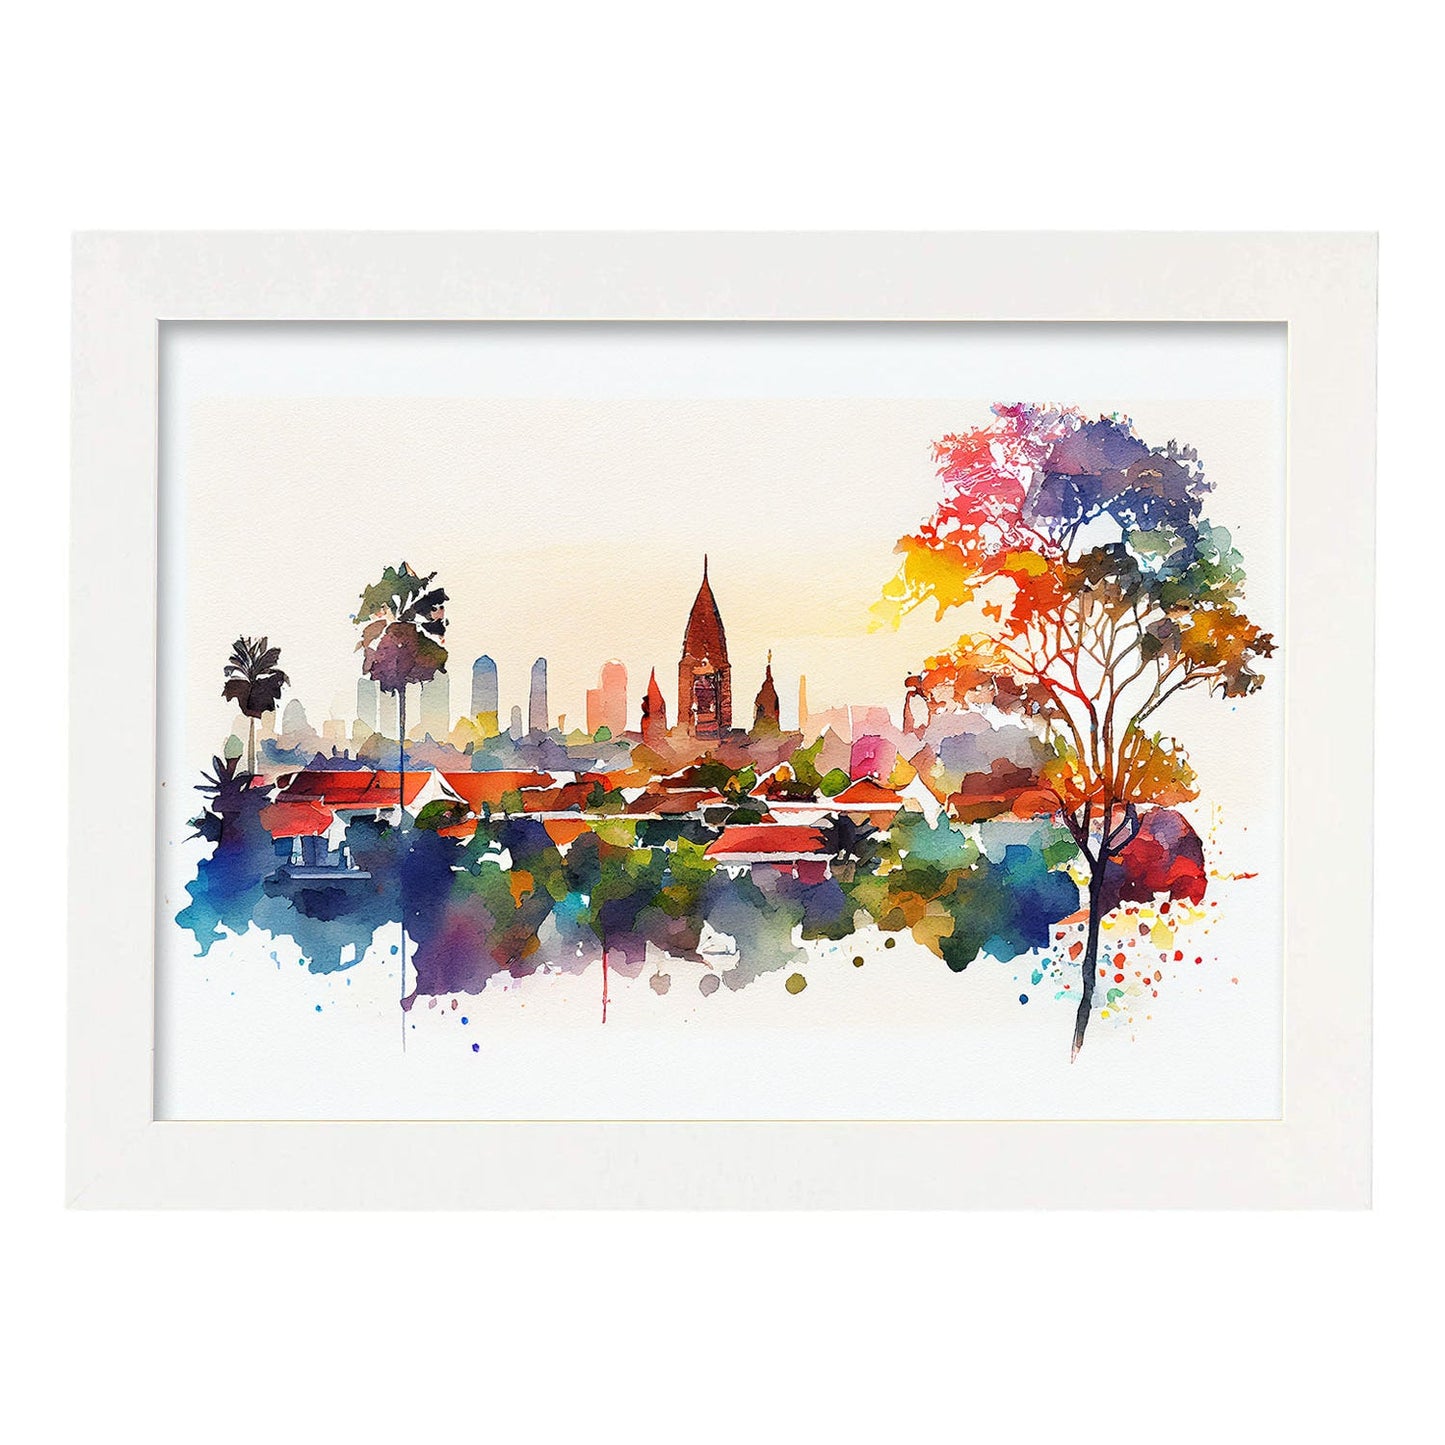 Nacnic watercolor of a skyline of the city of Bali_1. Aesthetic Wall Art Prints for Bedroom or Living Room Design.-Artwork-Nacnic-A4-Marco Blanco-Nacnic Estudio SL